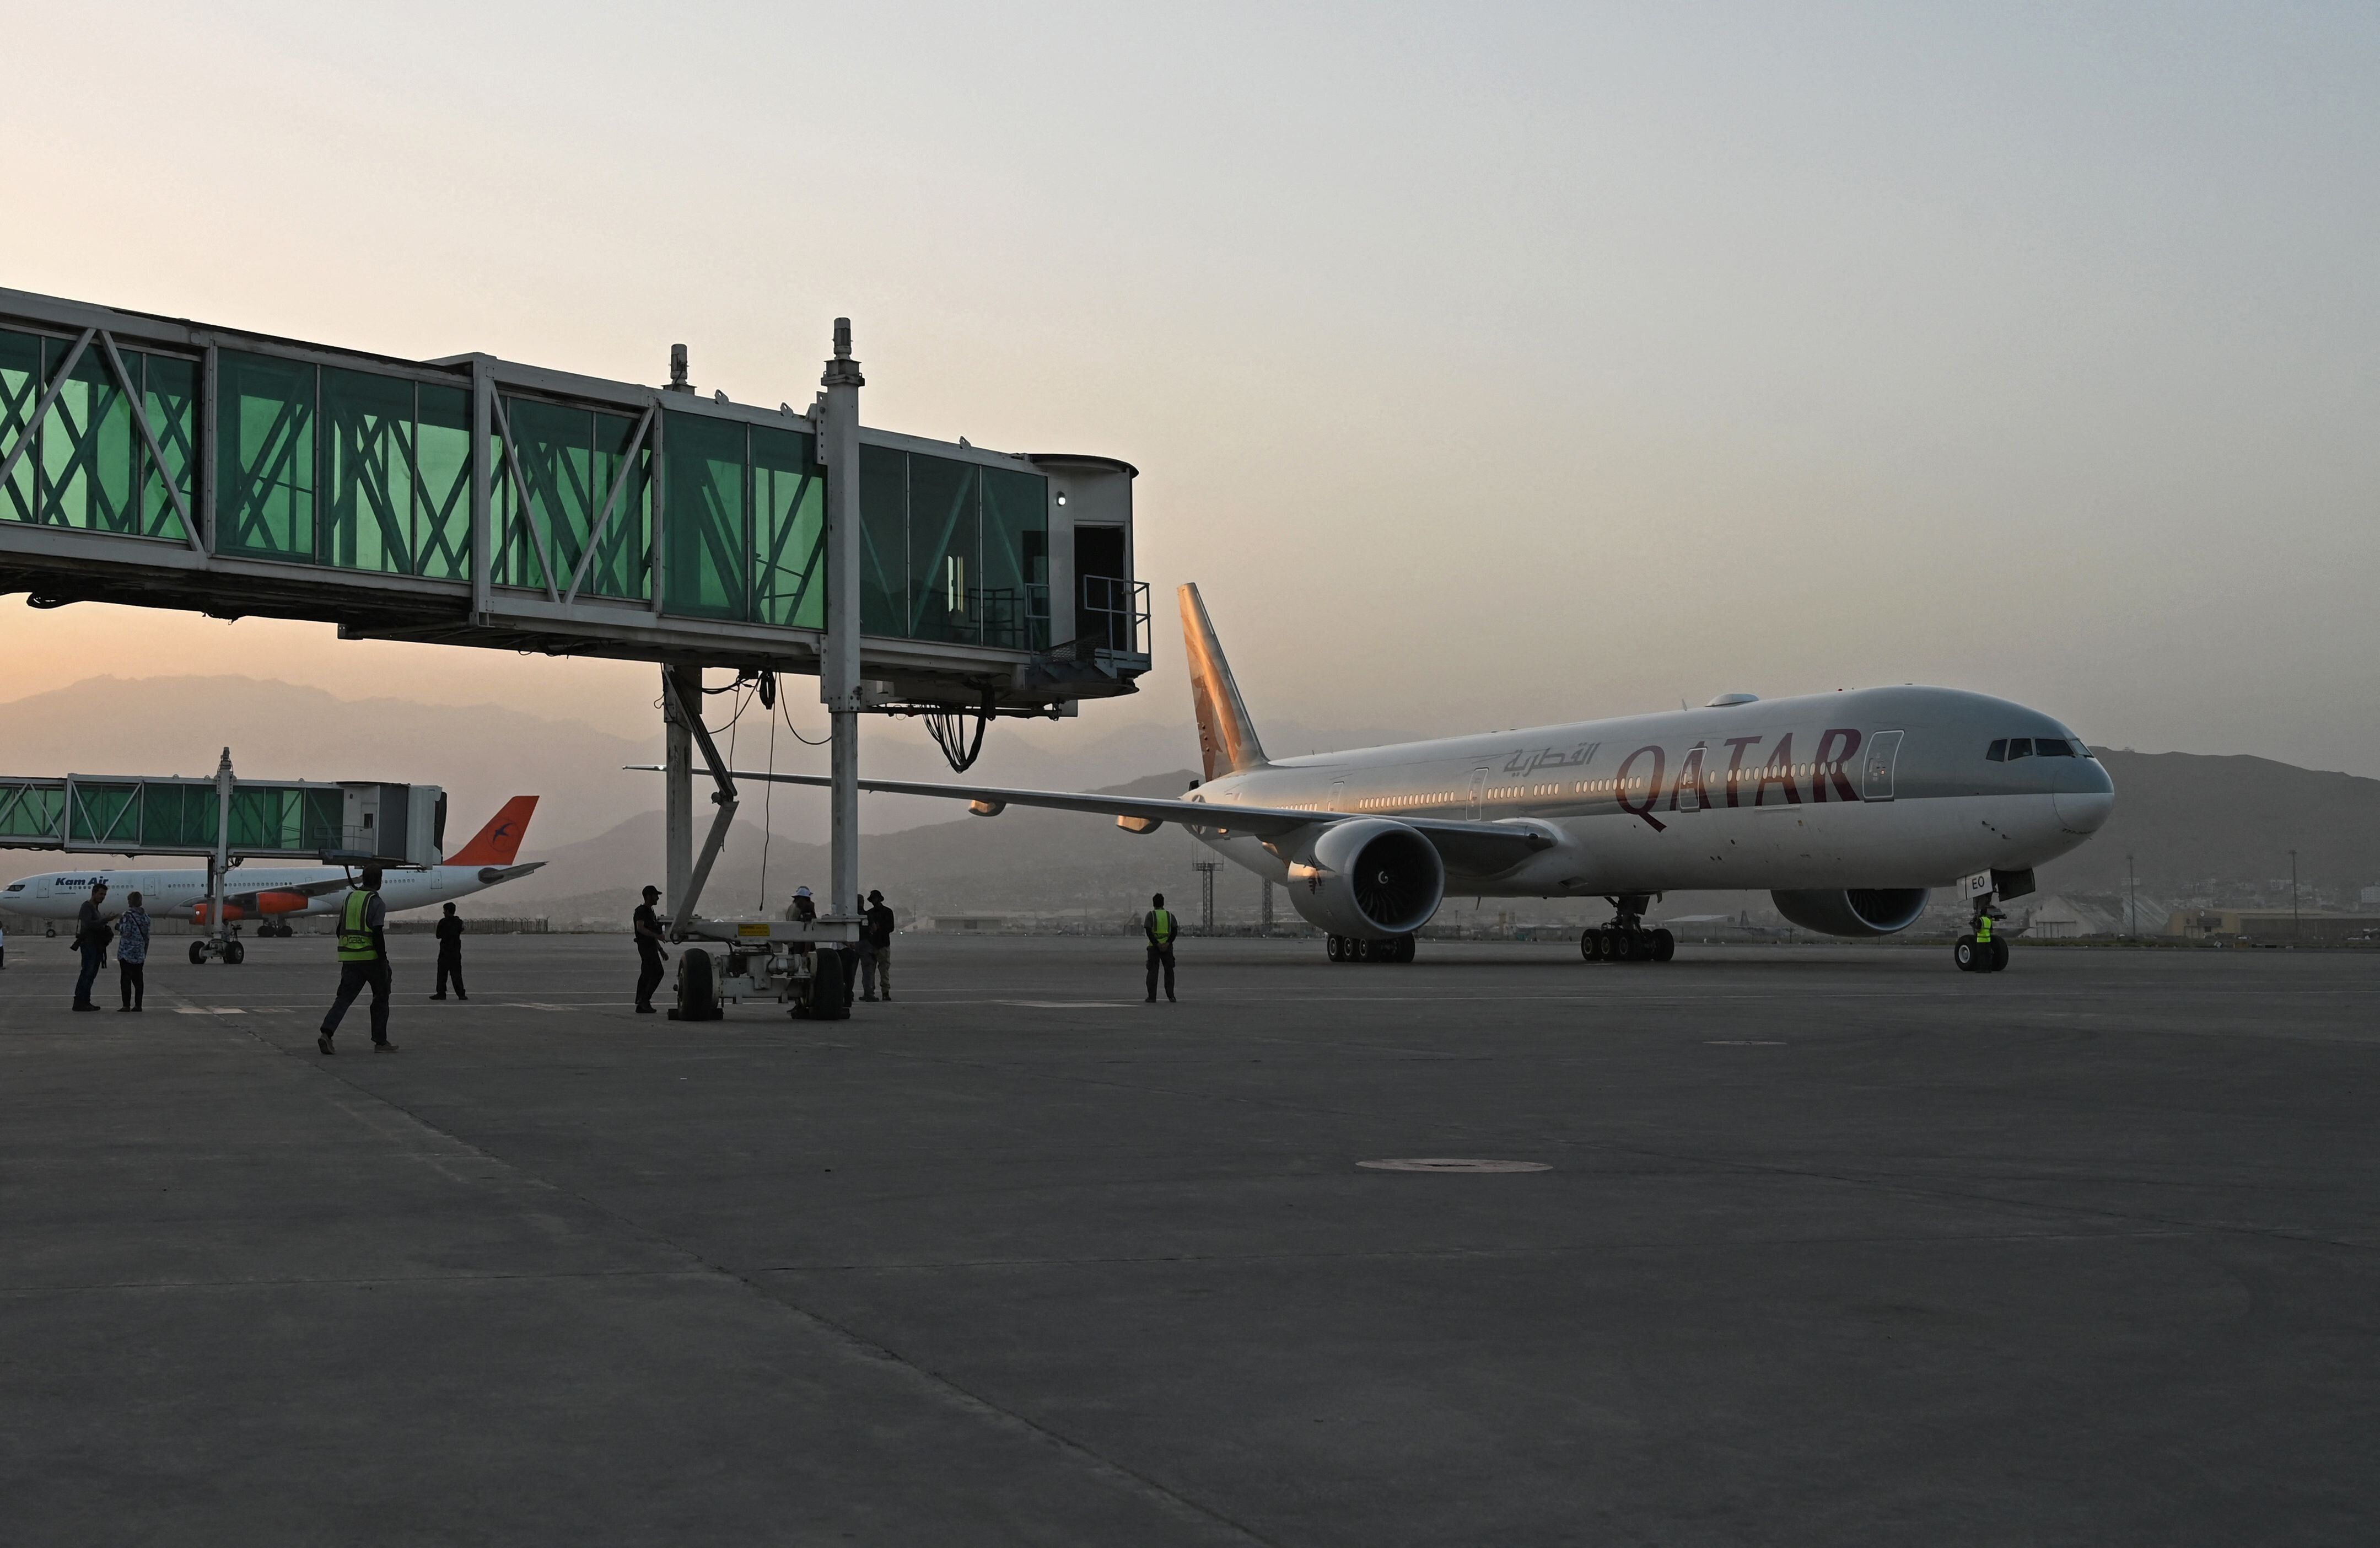 Members of ground staff stand on the tarmac as a Qatar Airways aircraft taxis before taking off from the airport in Kabul on 